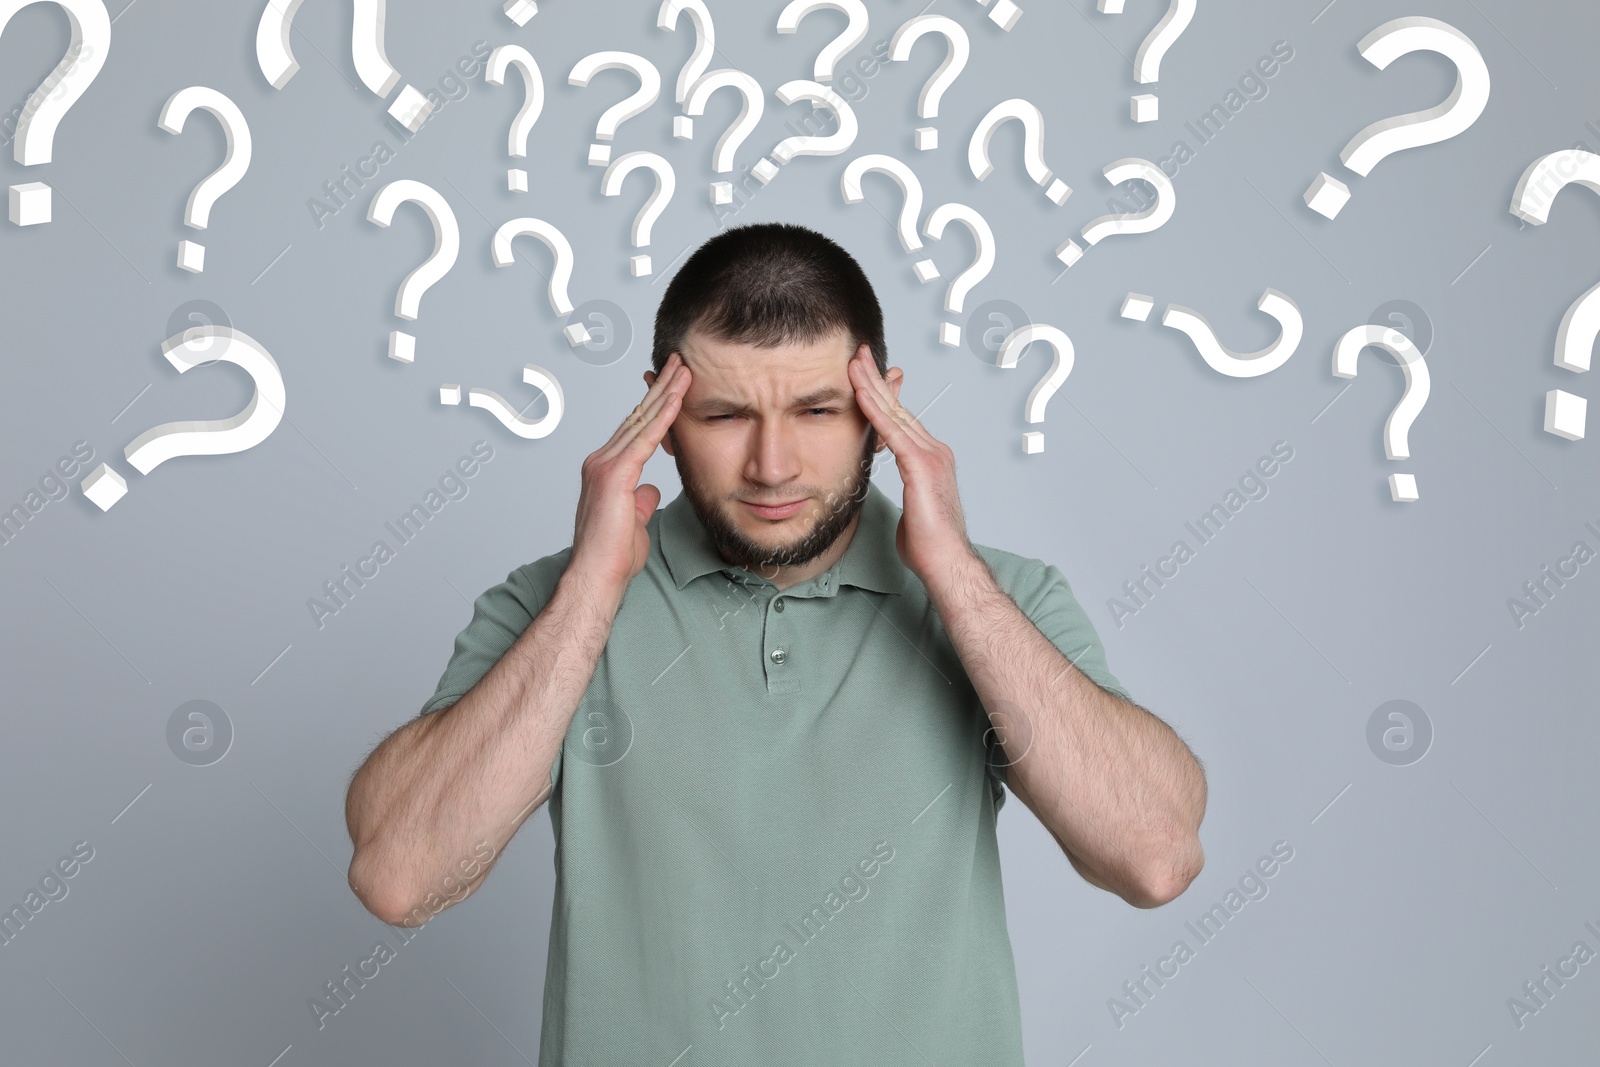 Image of Amnesia. Confused man and question marks on light grey background